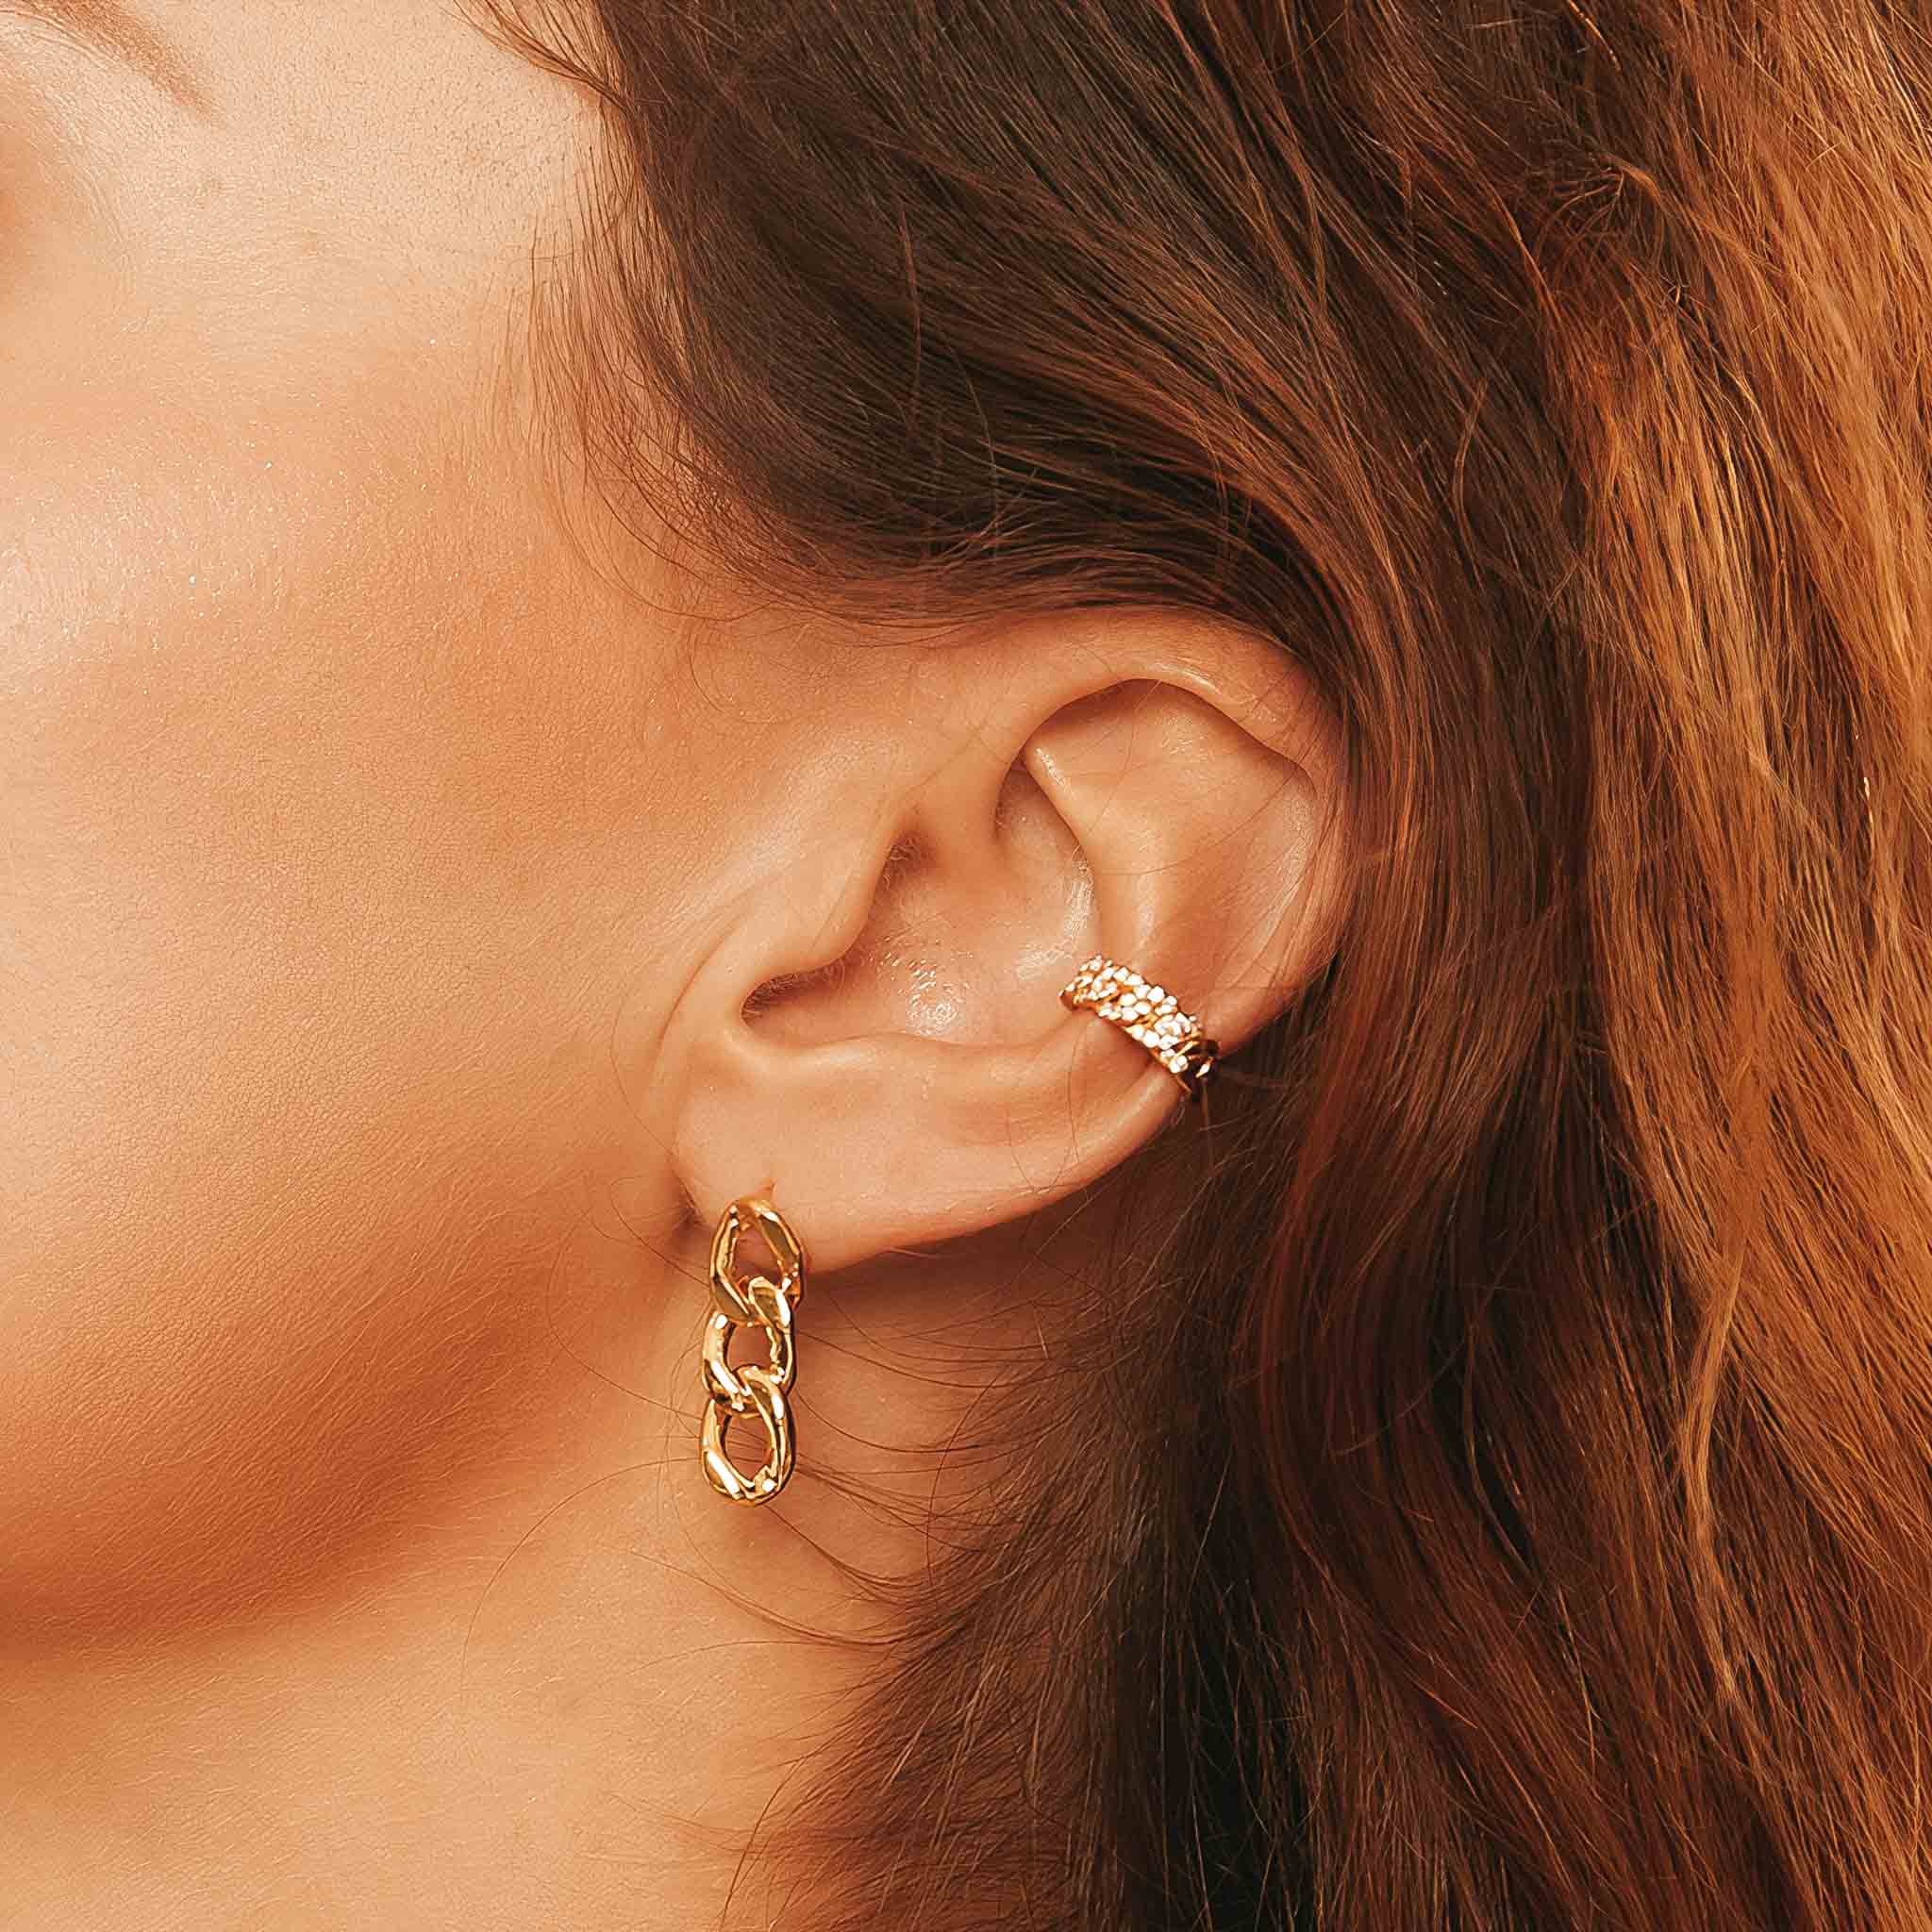 Discover more than 224 cuban link hoop earrings latest